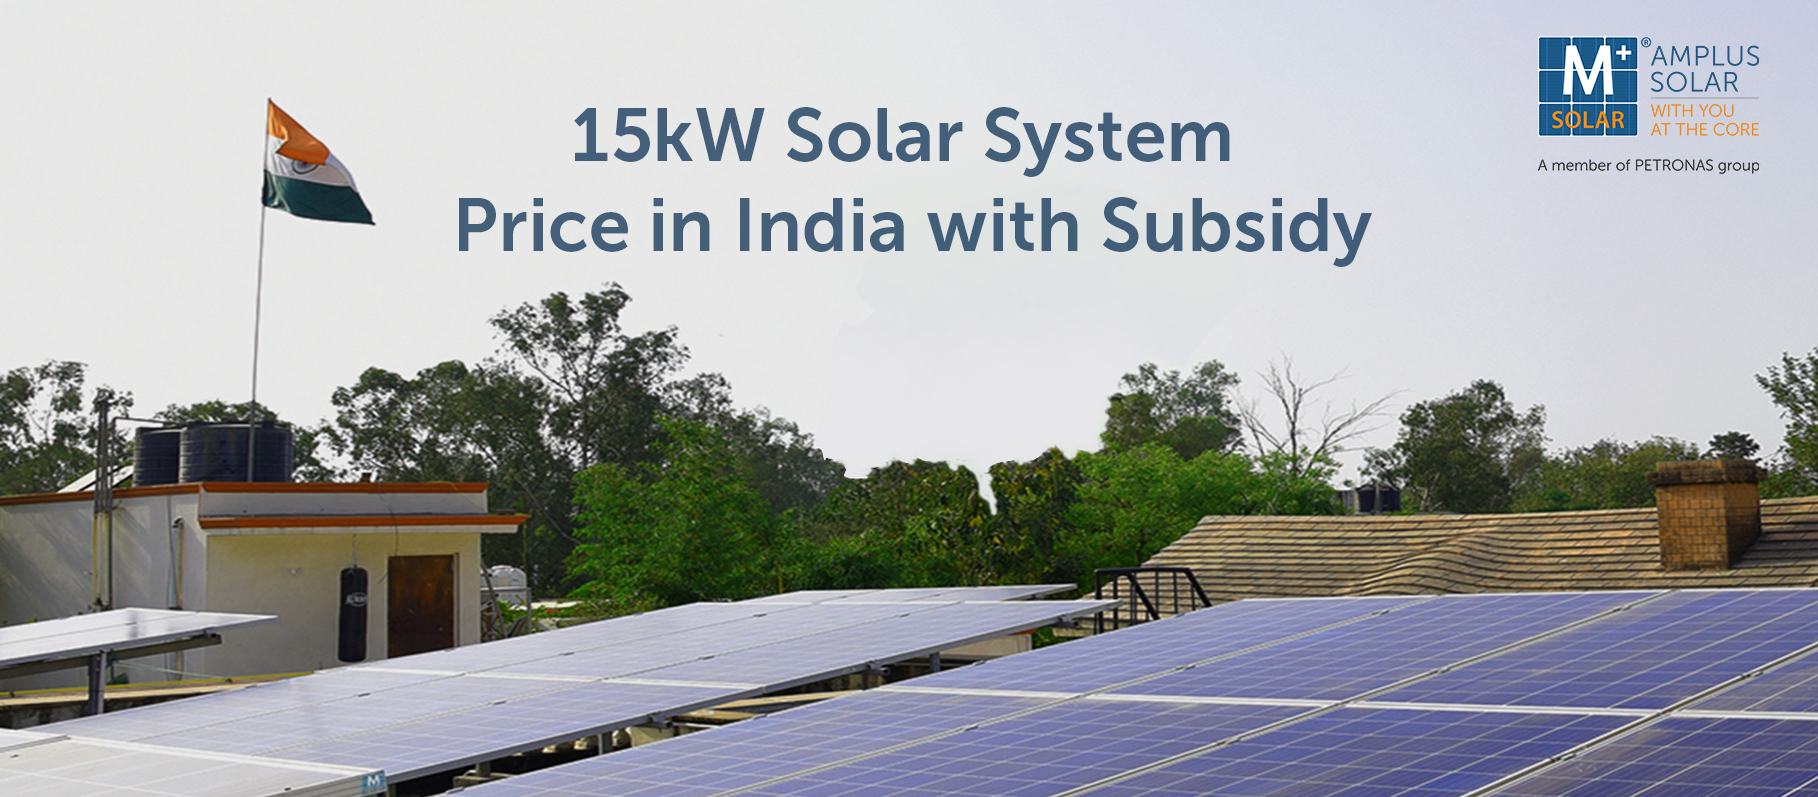 15kW Solar System Price in India with Subsidy